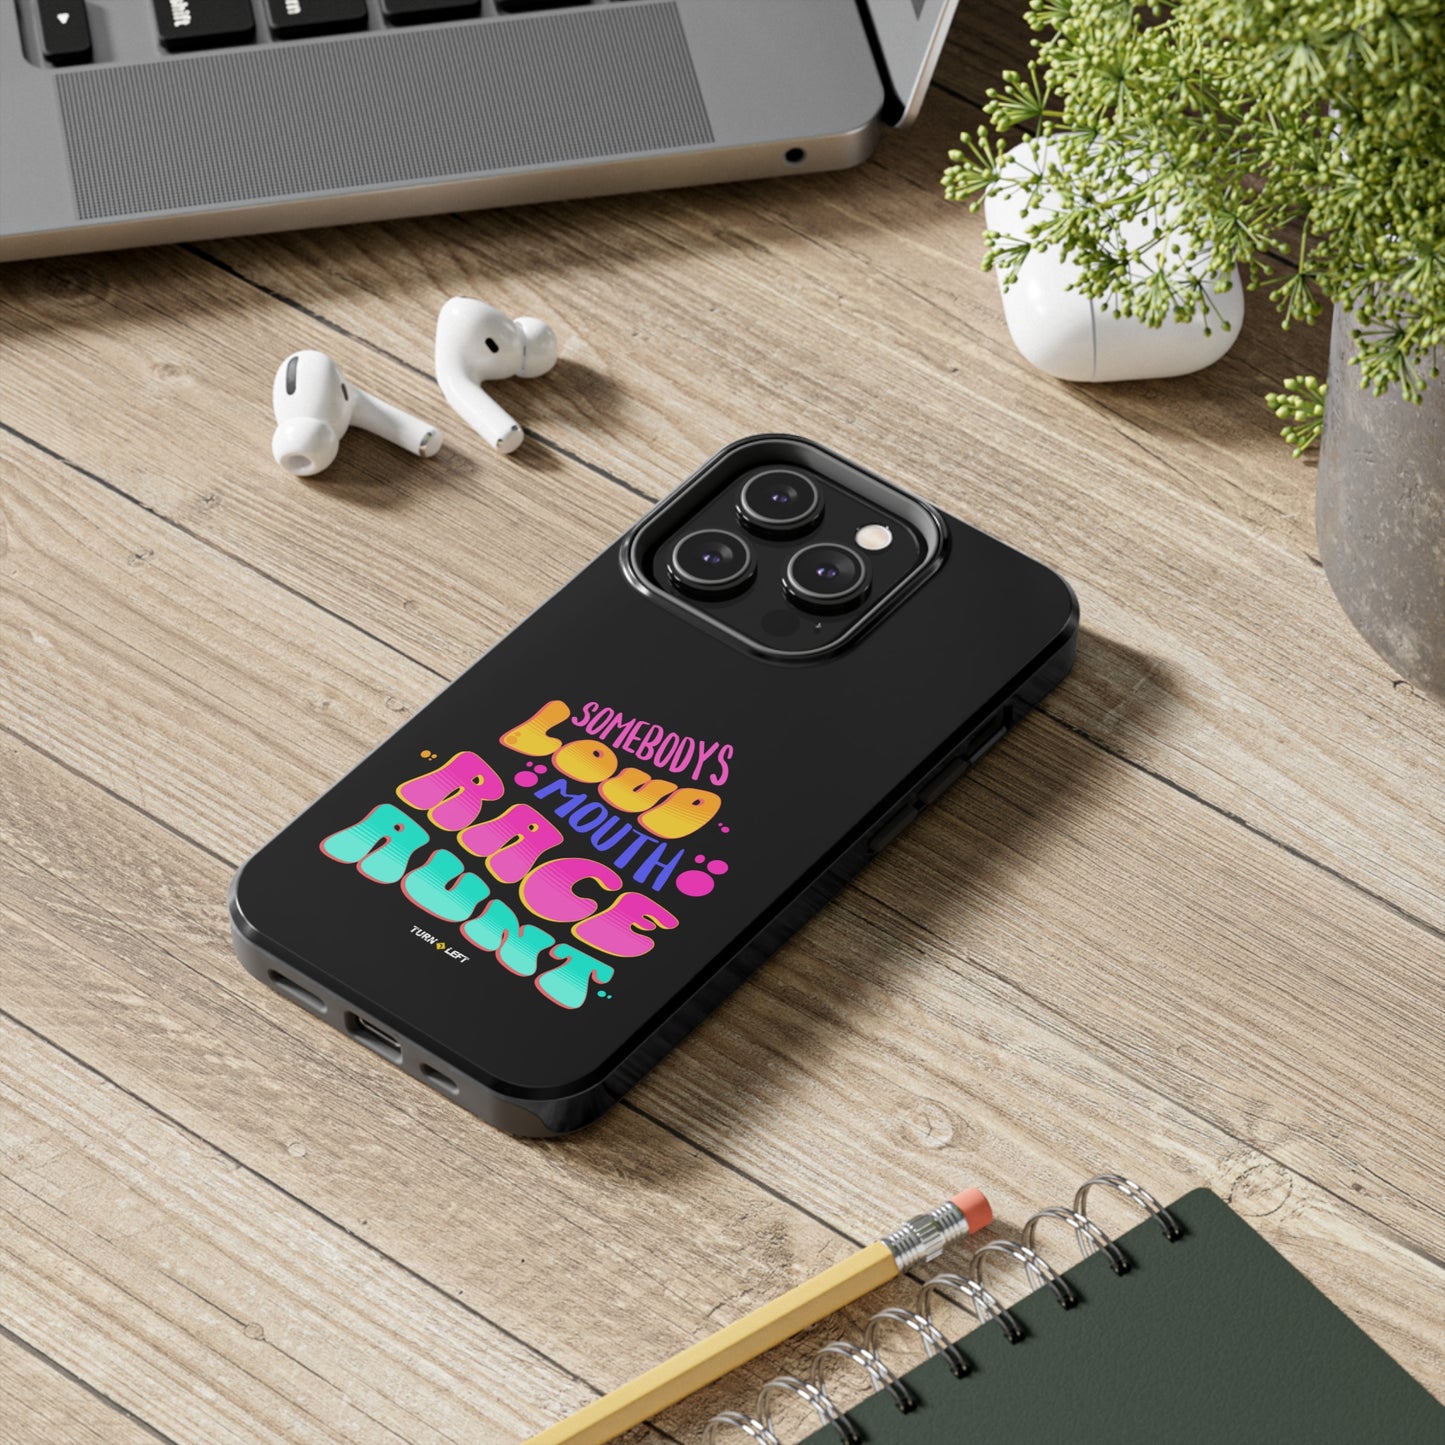 Retro Somebody's Loud Mouth Race Aunt Tough Phone Cases